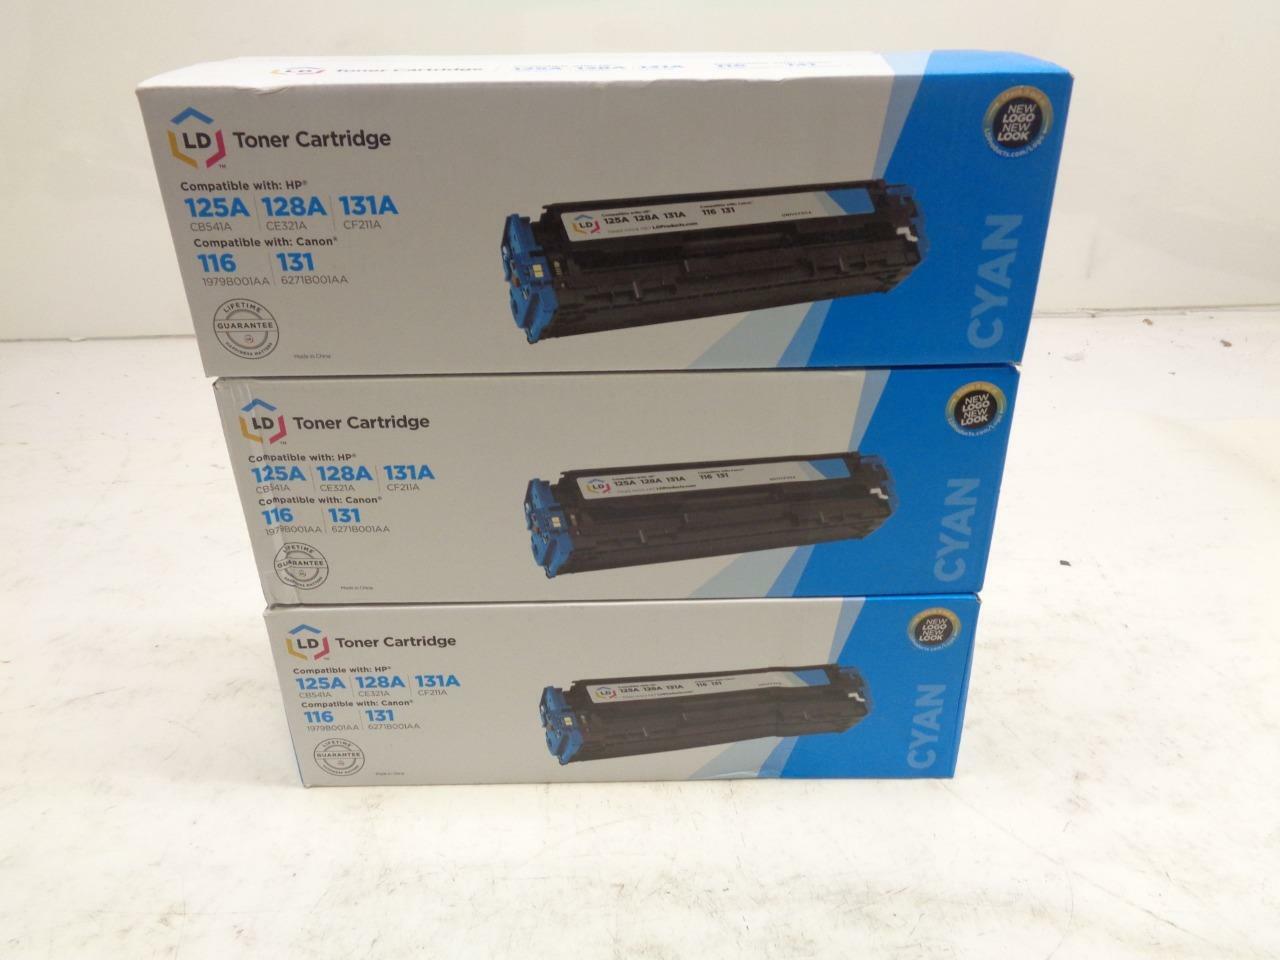 3 REMAN LD PRODUCTS TONER CARTRIDGES CYAN FOR HP 125A 128A & CANON 116, 131 SR